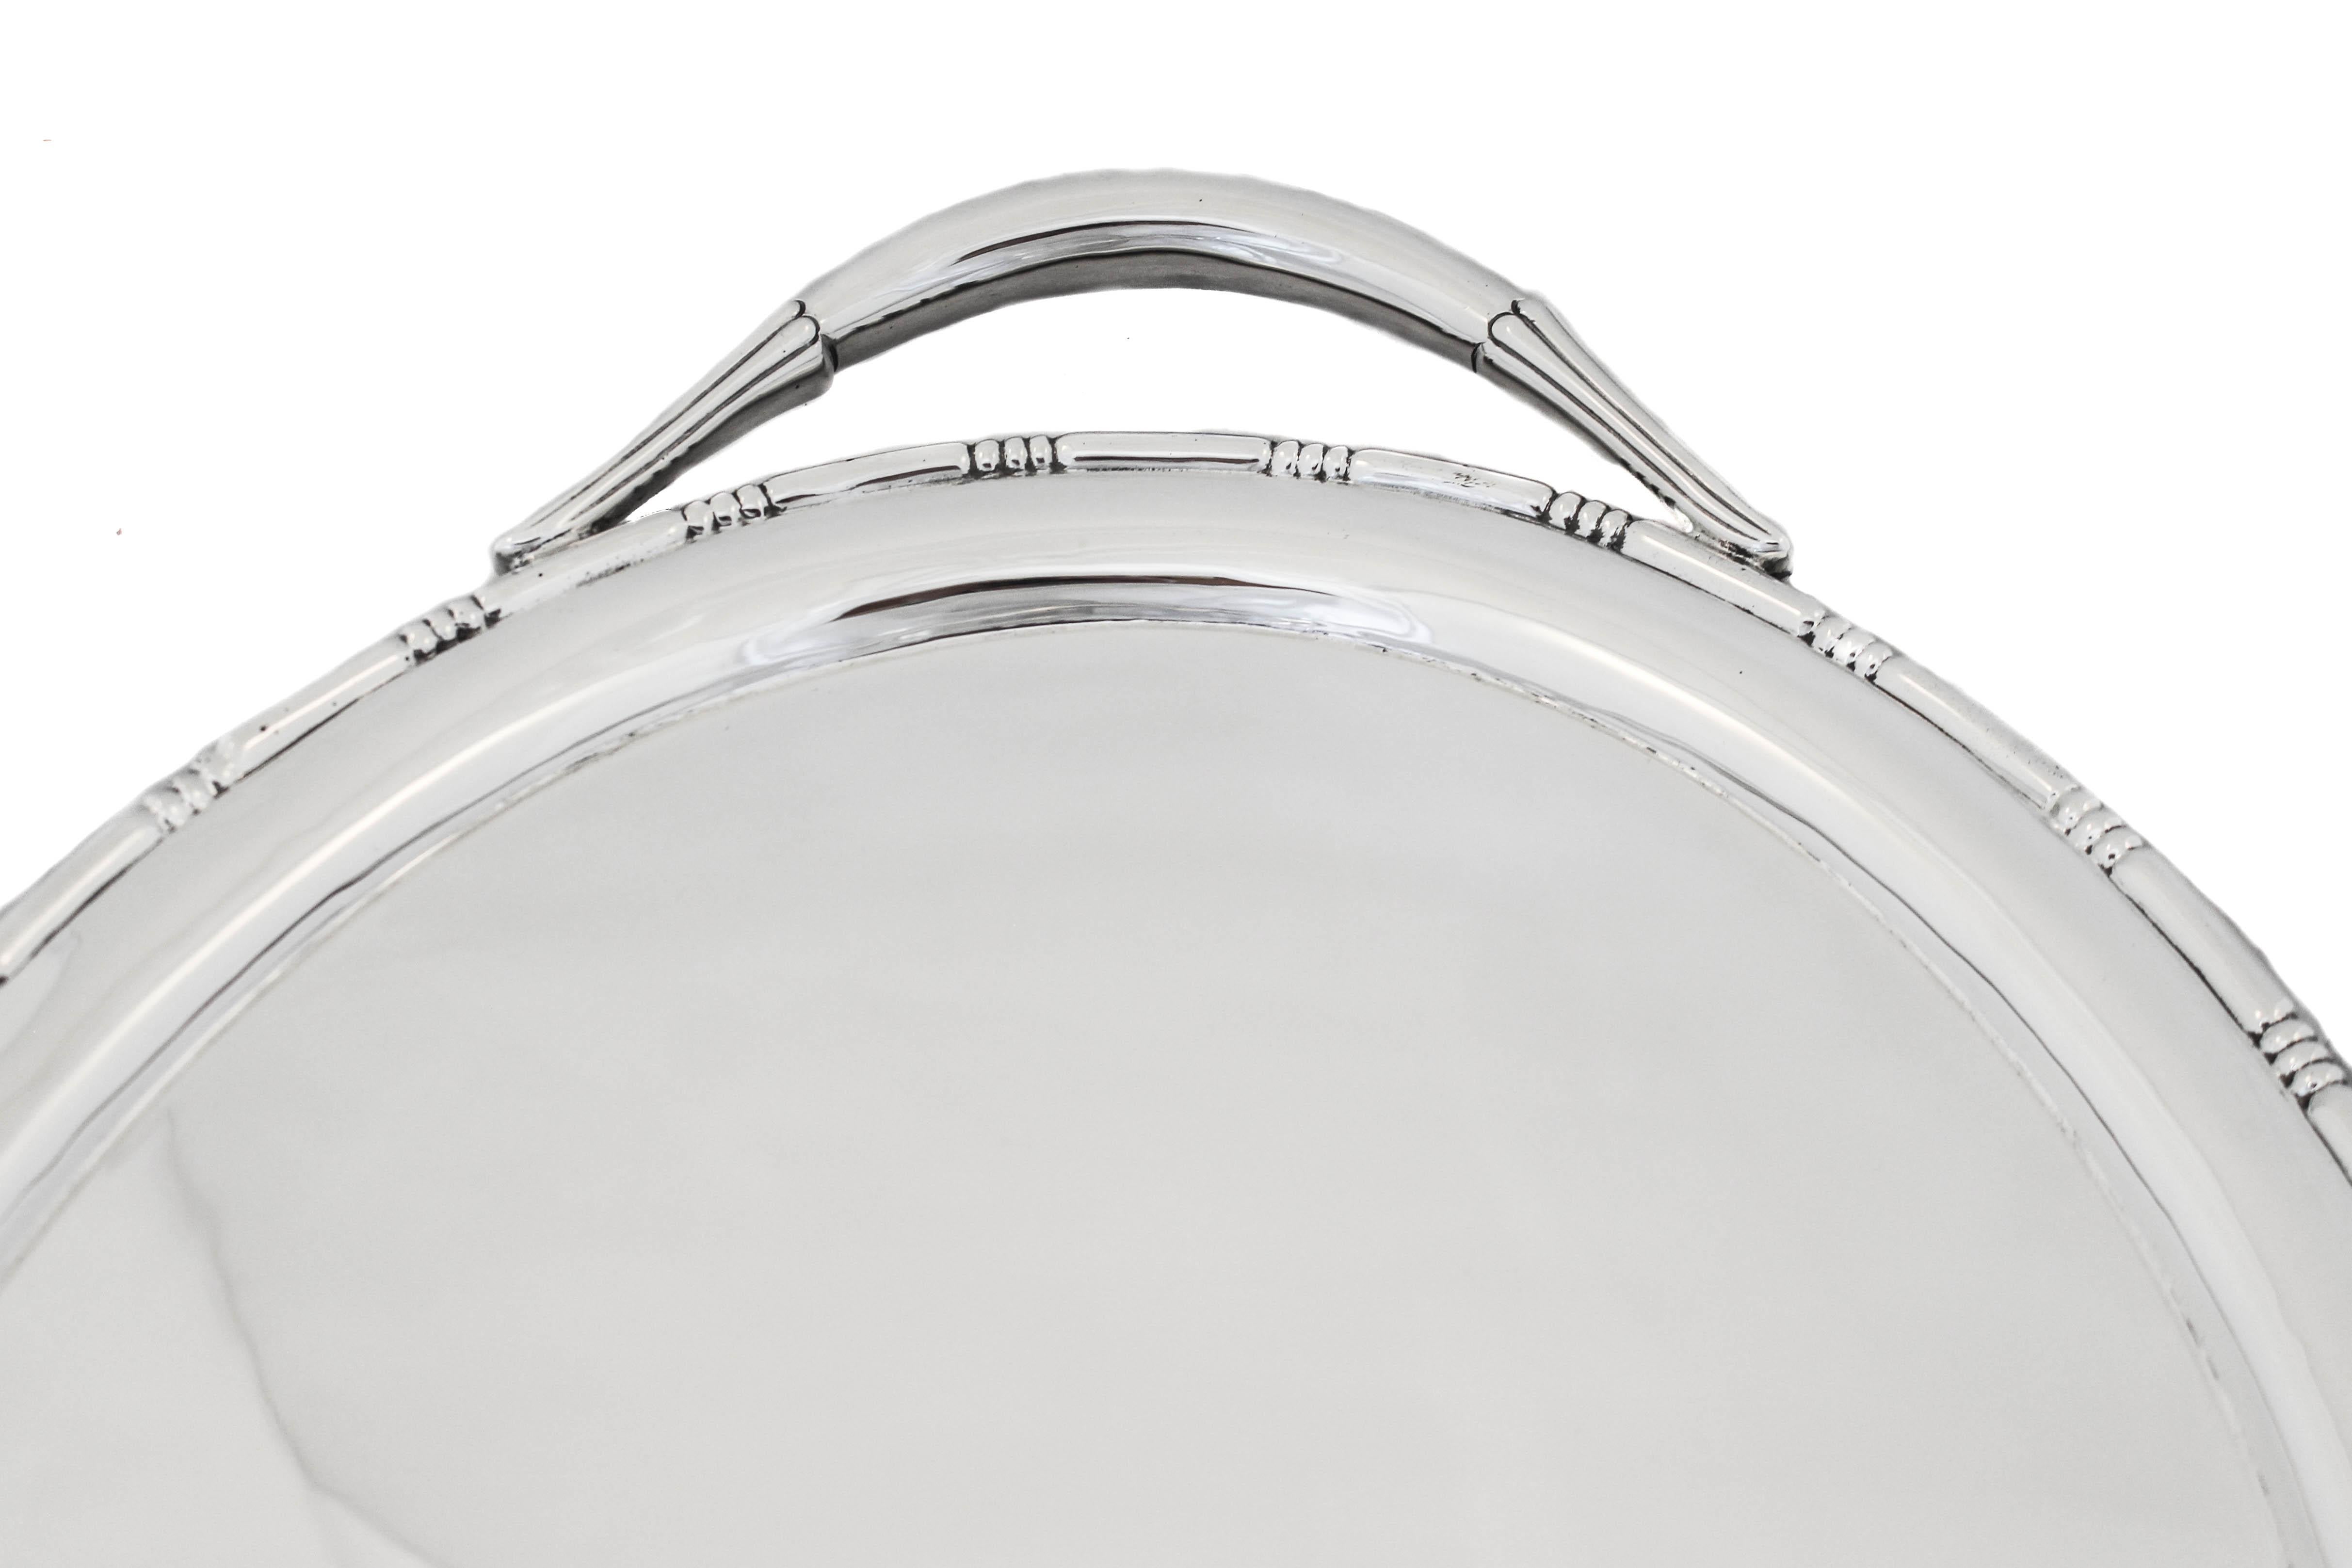 We are delighted to offer you this large sterling silver Art Deco tray from the 1920’s.  It is a large and very heavy tray that can be used for serving or under a tea set.  The pattern around the rim is a series of three-notches every one and half